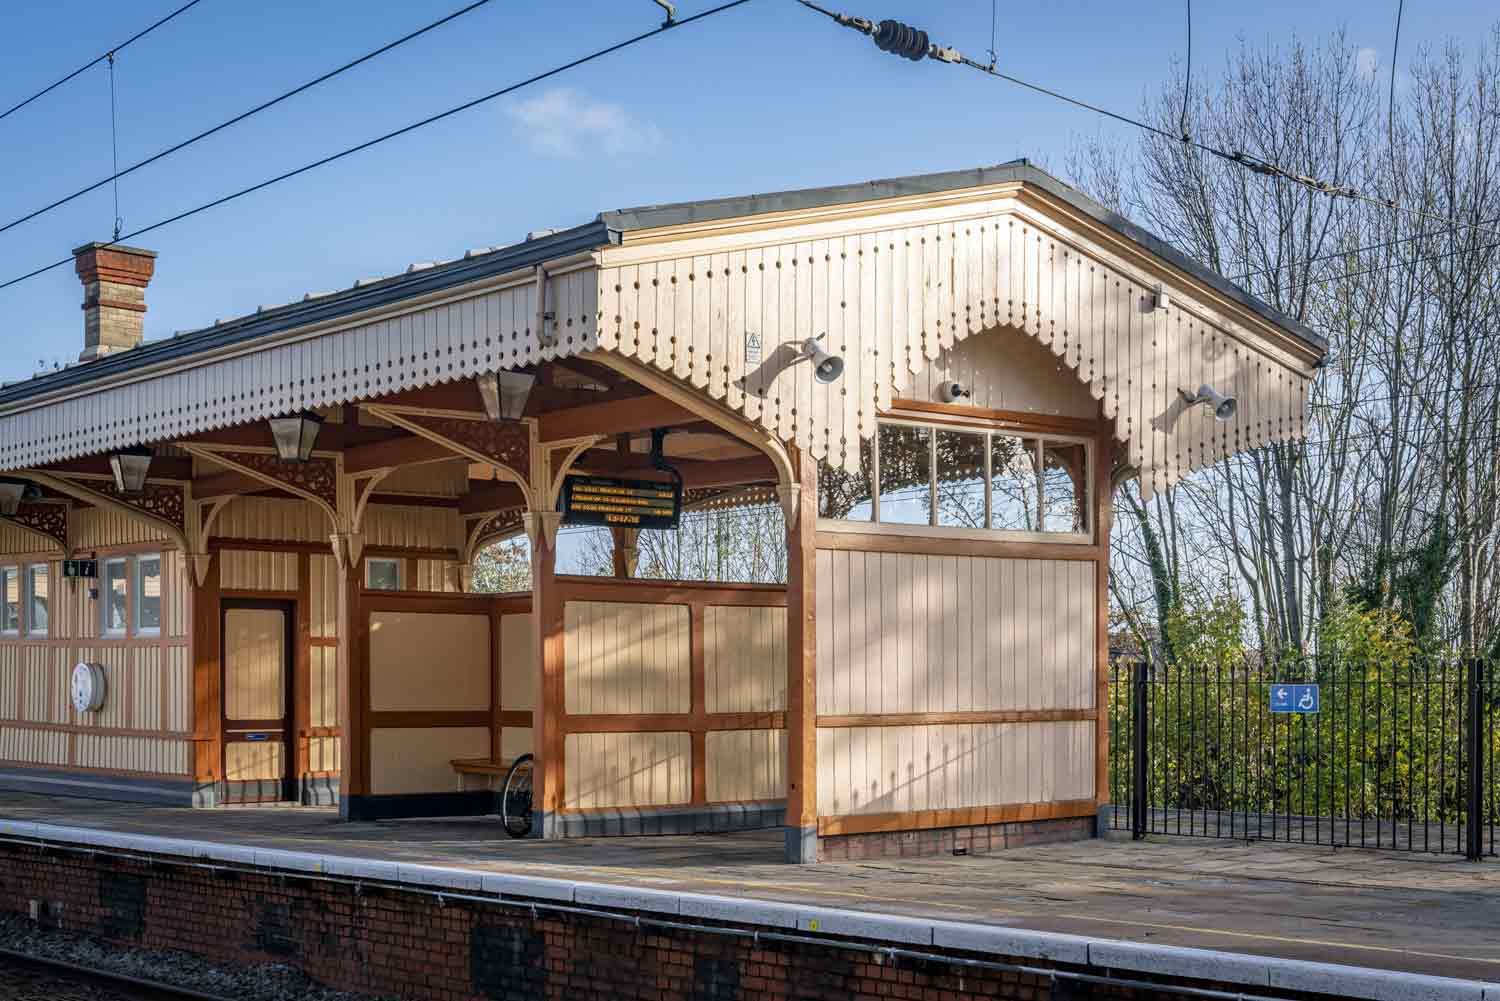 The wooden island platform building at Hanwell Station is painted brown and cream.